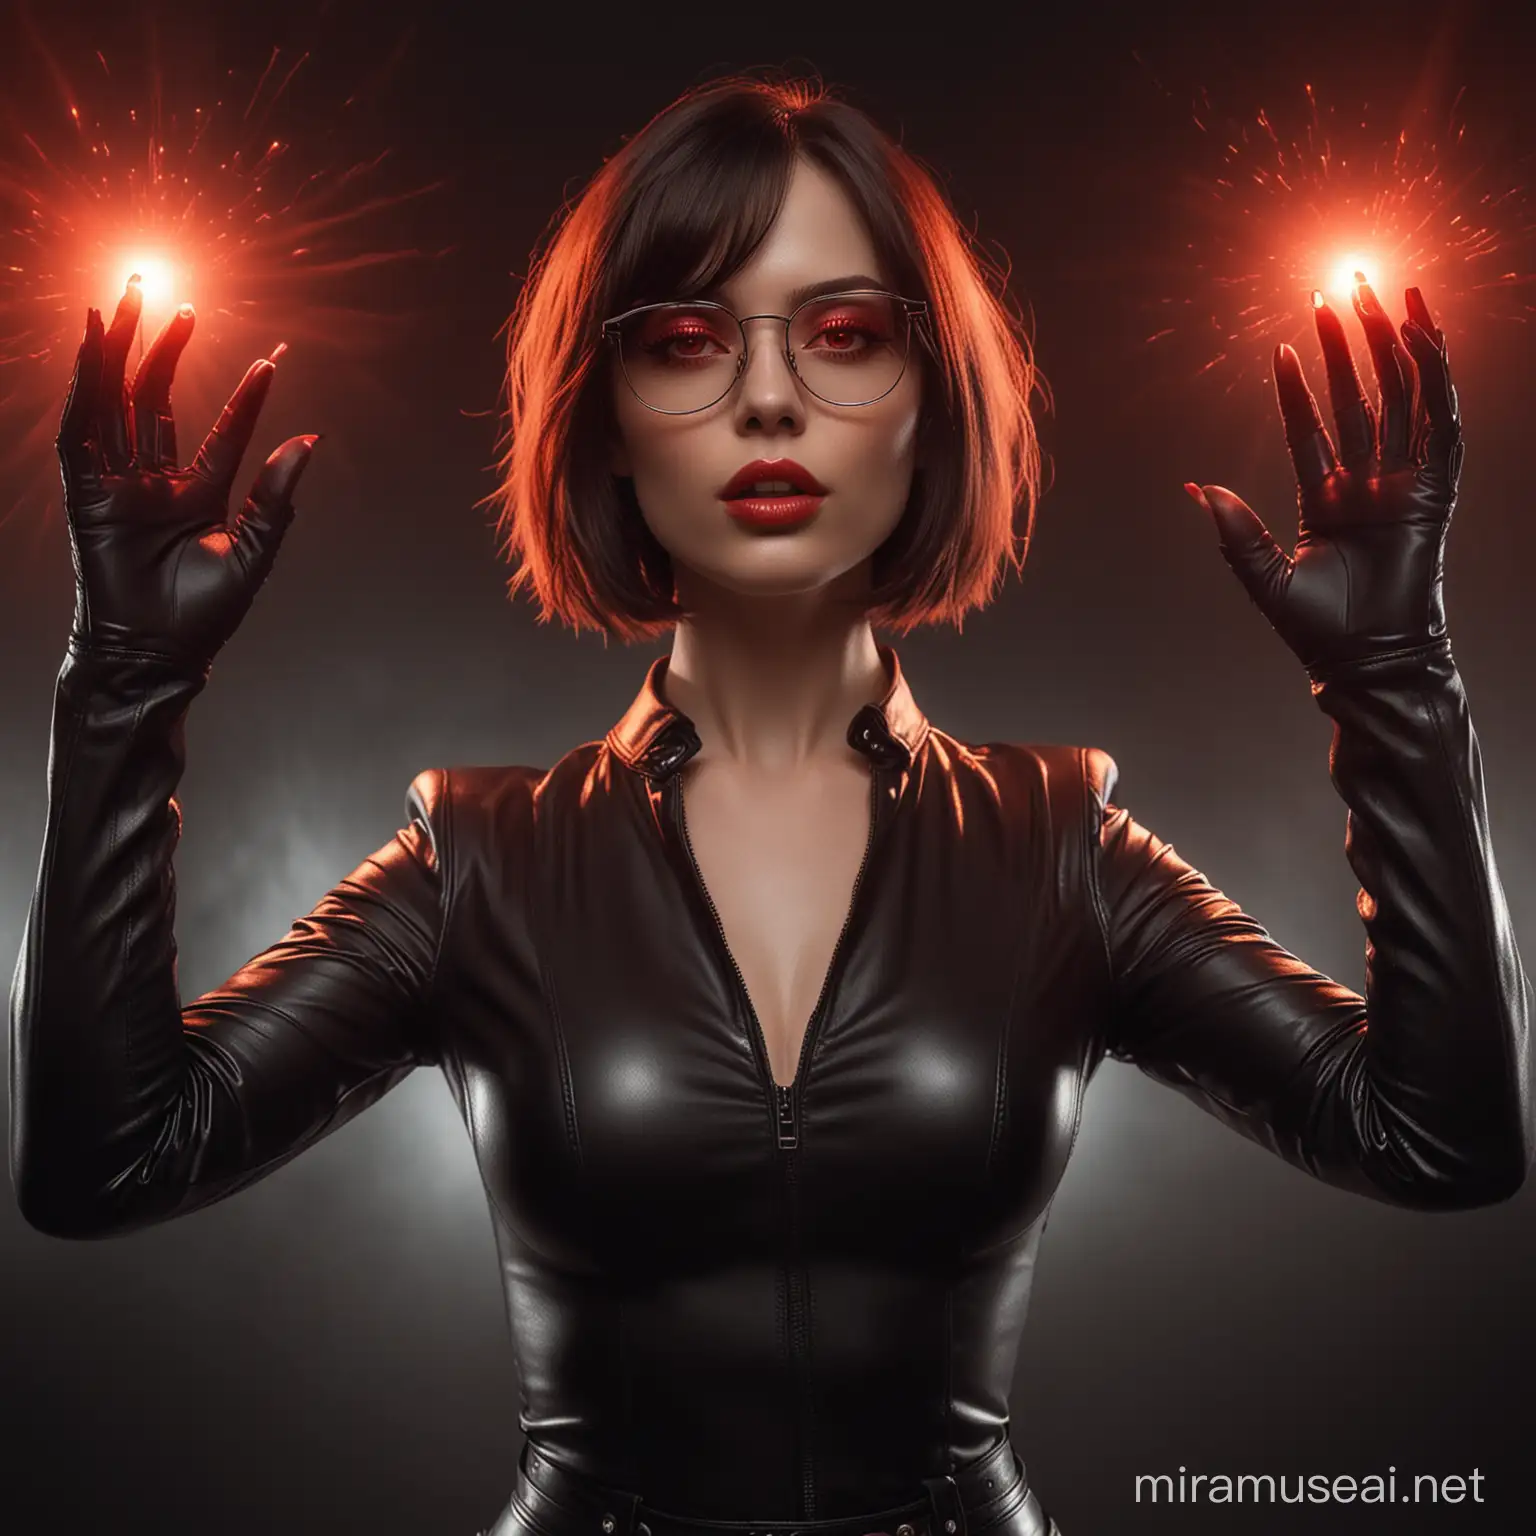 A beautiful pale skin lady with bob hair brown, eyeglasses, red glowing eyes and a black sexy leather outfit, summoning red blowing glow from her hands, while standing in the darkness